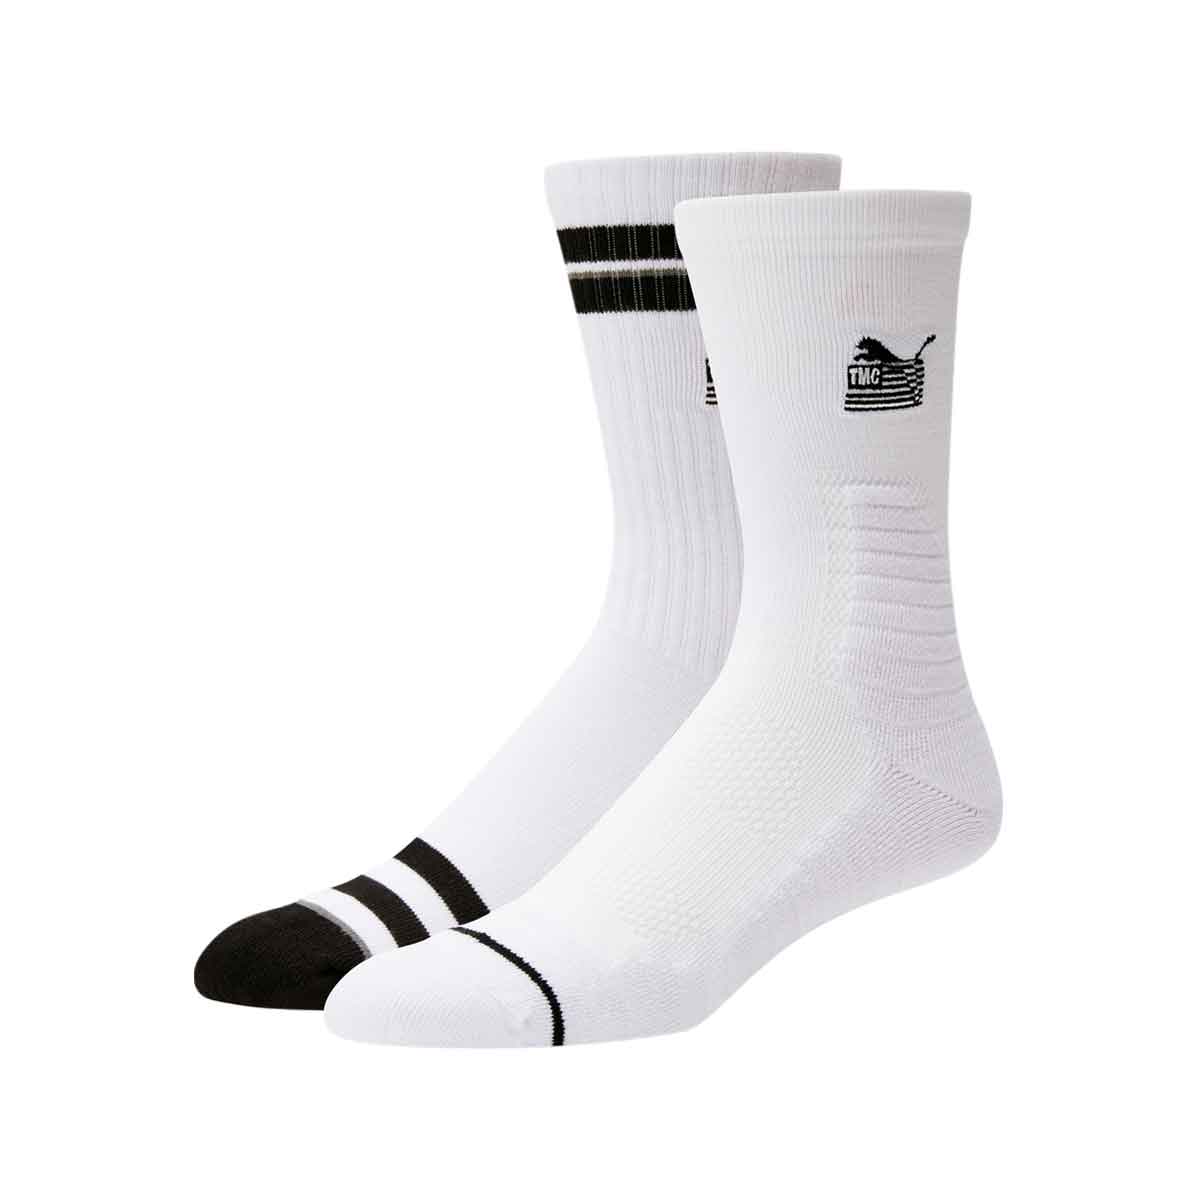 PUMA x TMC Everyday Hussle Collection Socks - White/Black (2 pack)